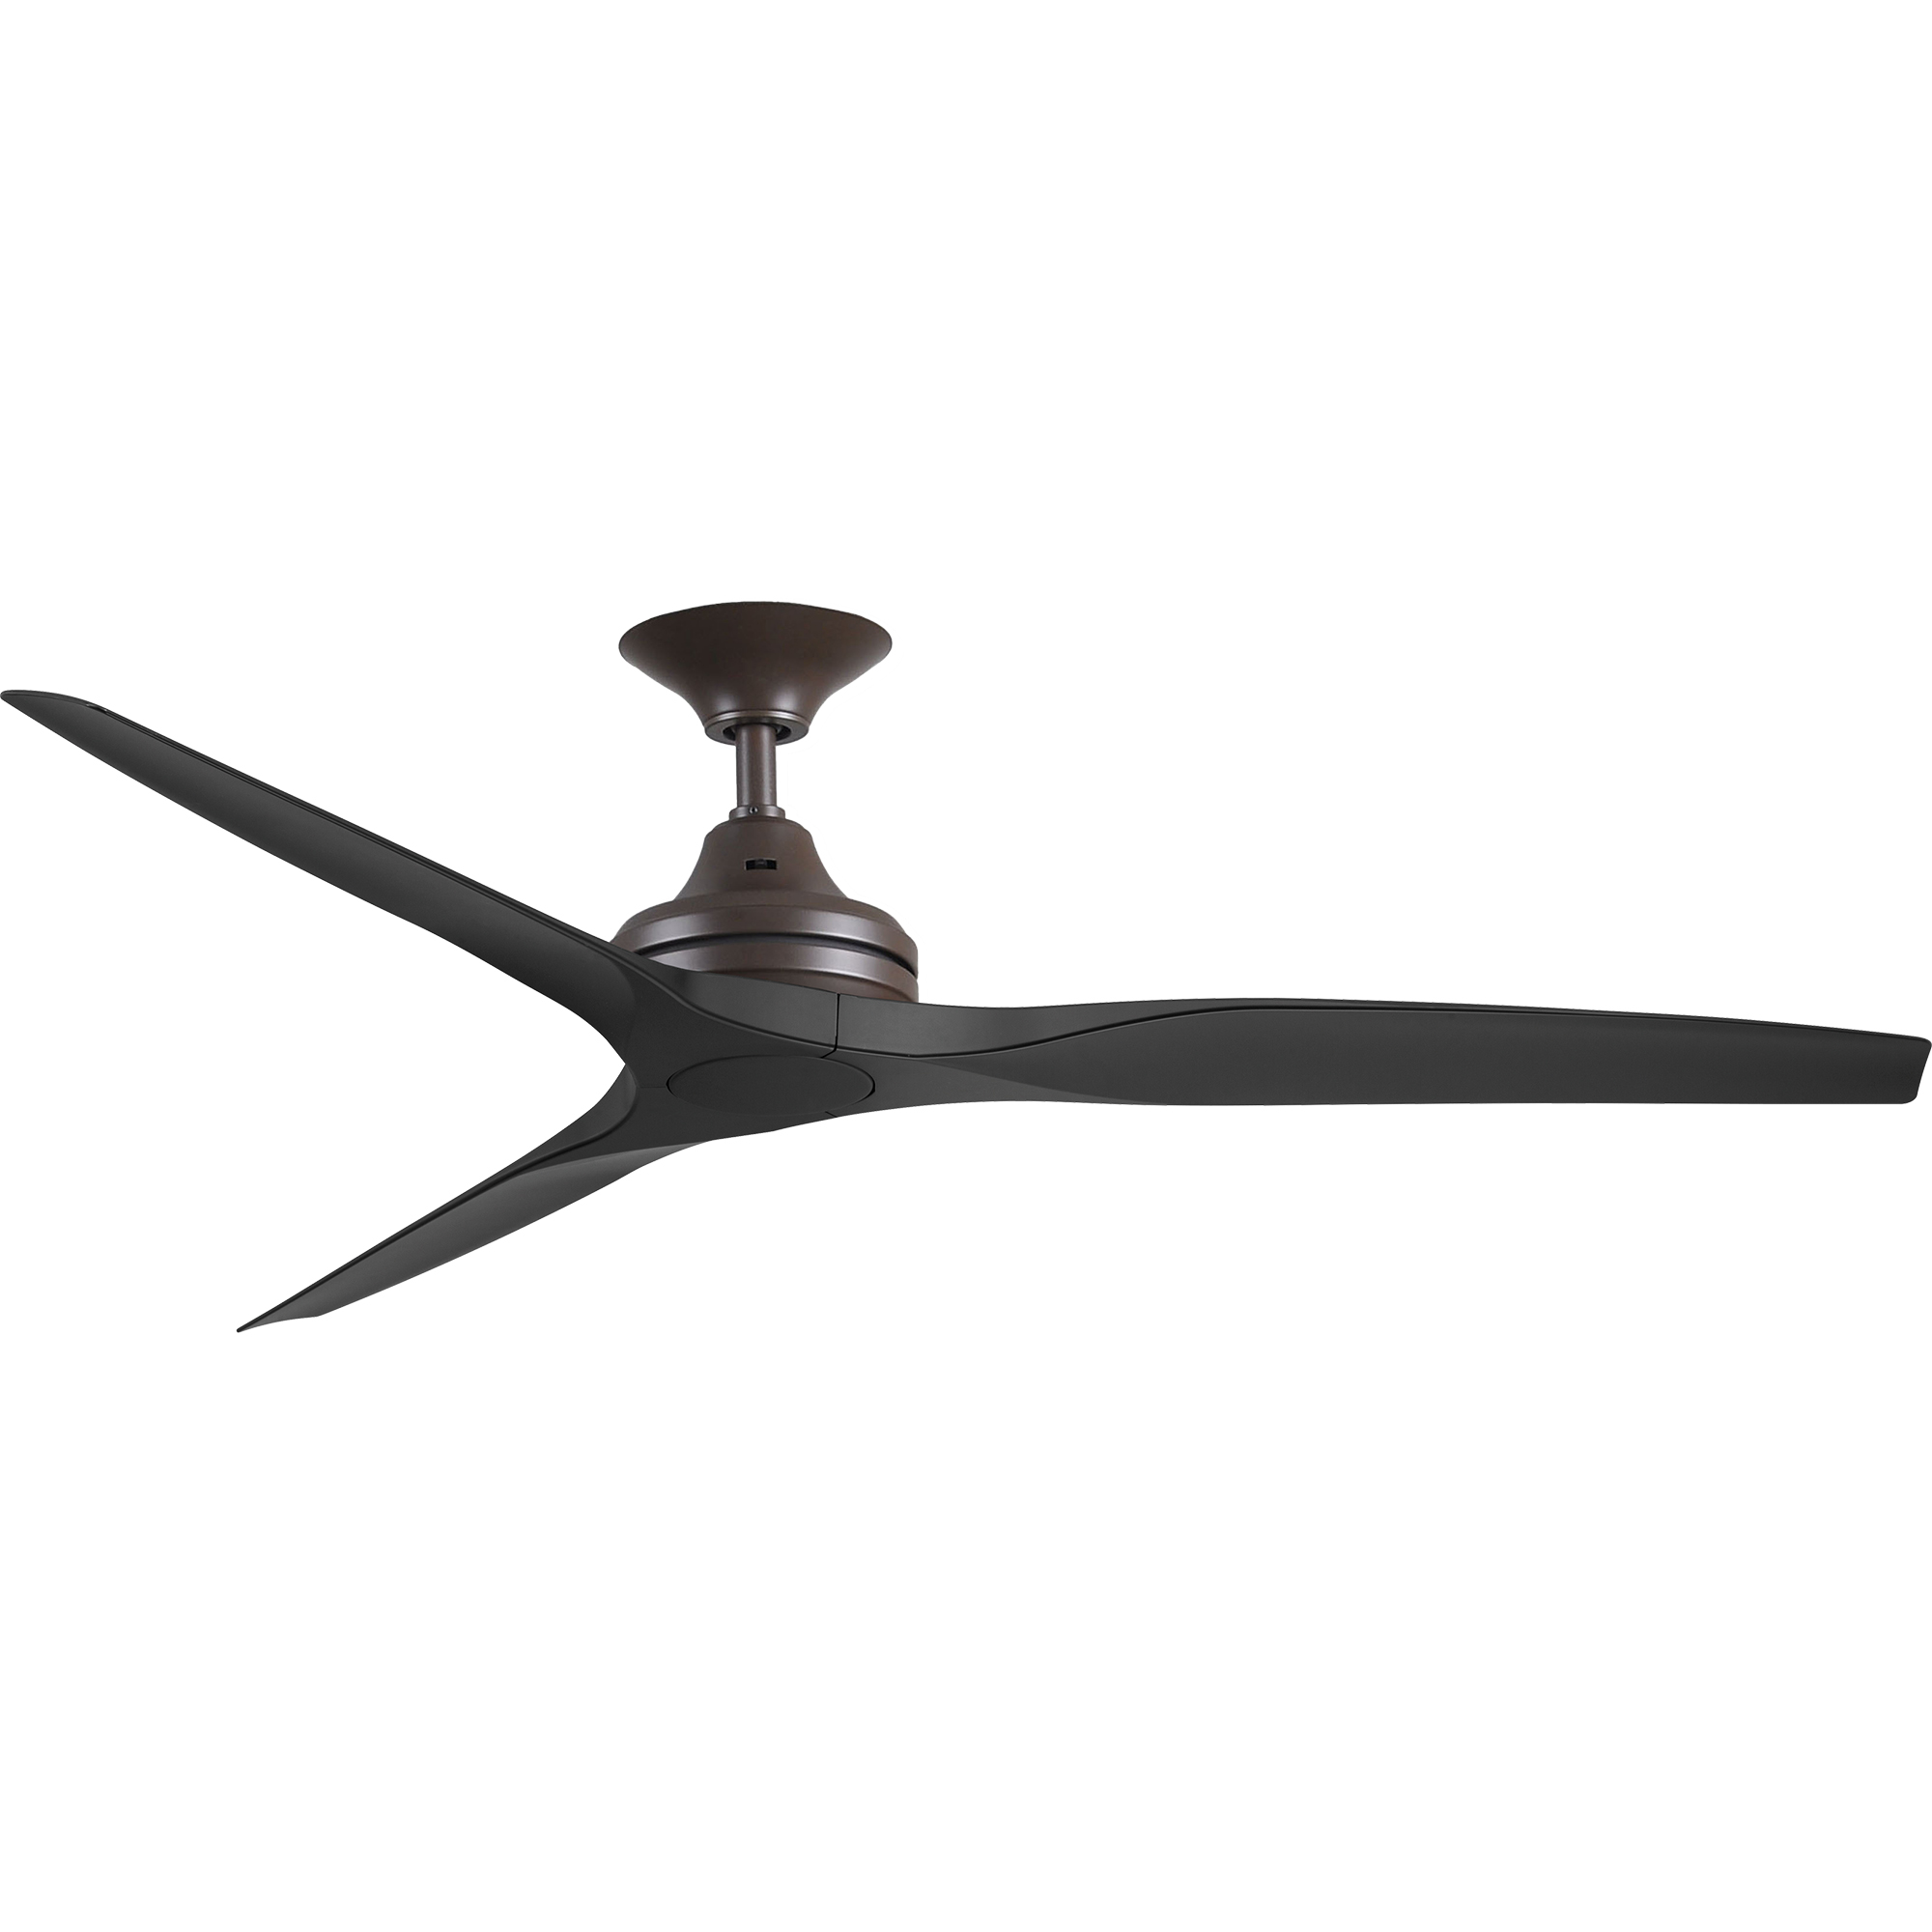 60" Spitfire in Oil-rubbed Bronze with Black polymer blades